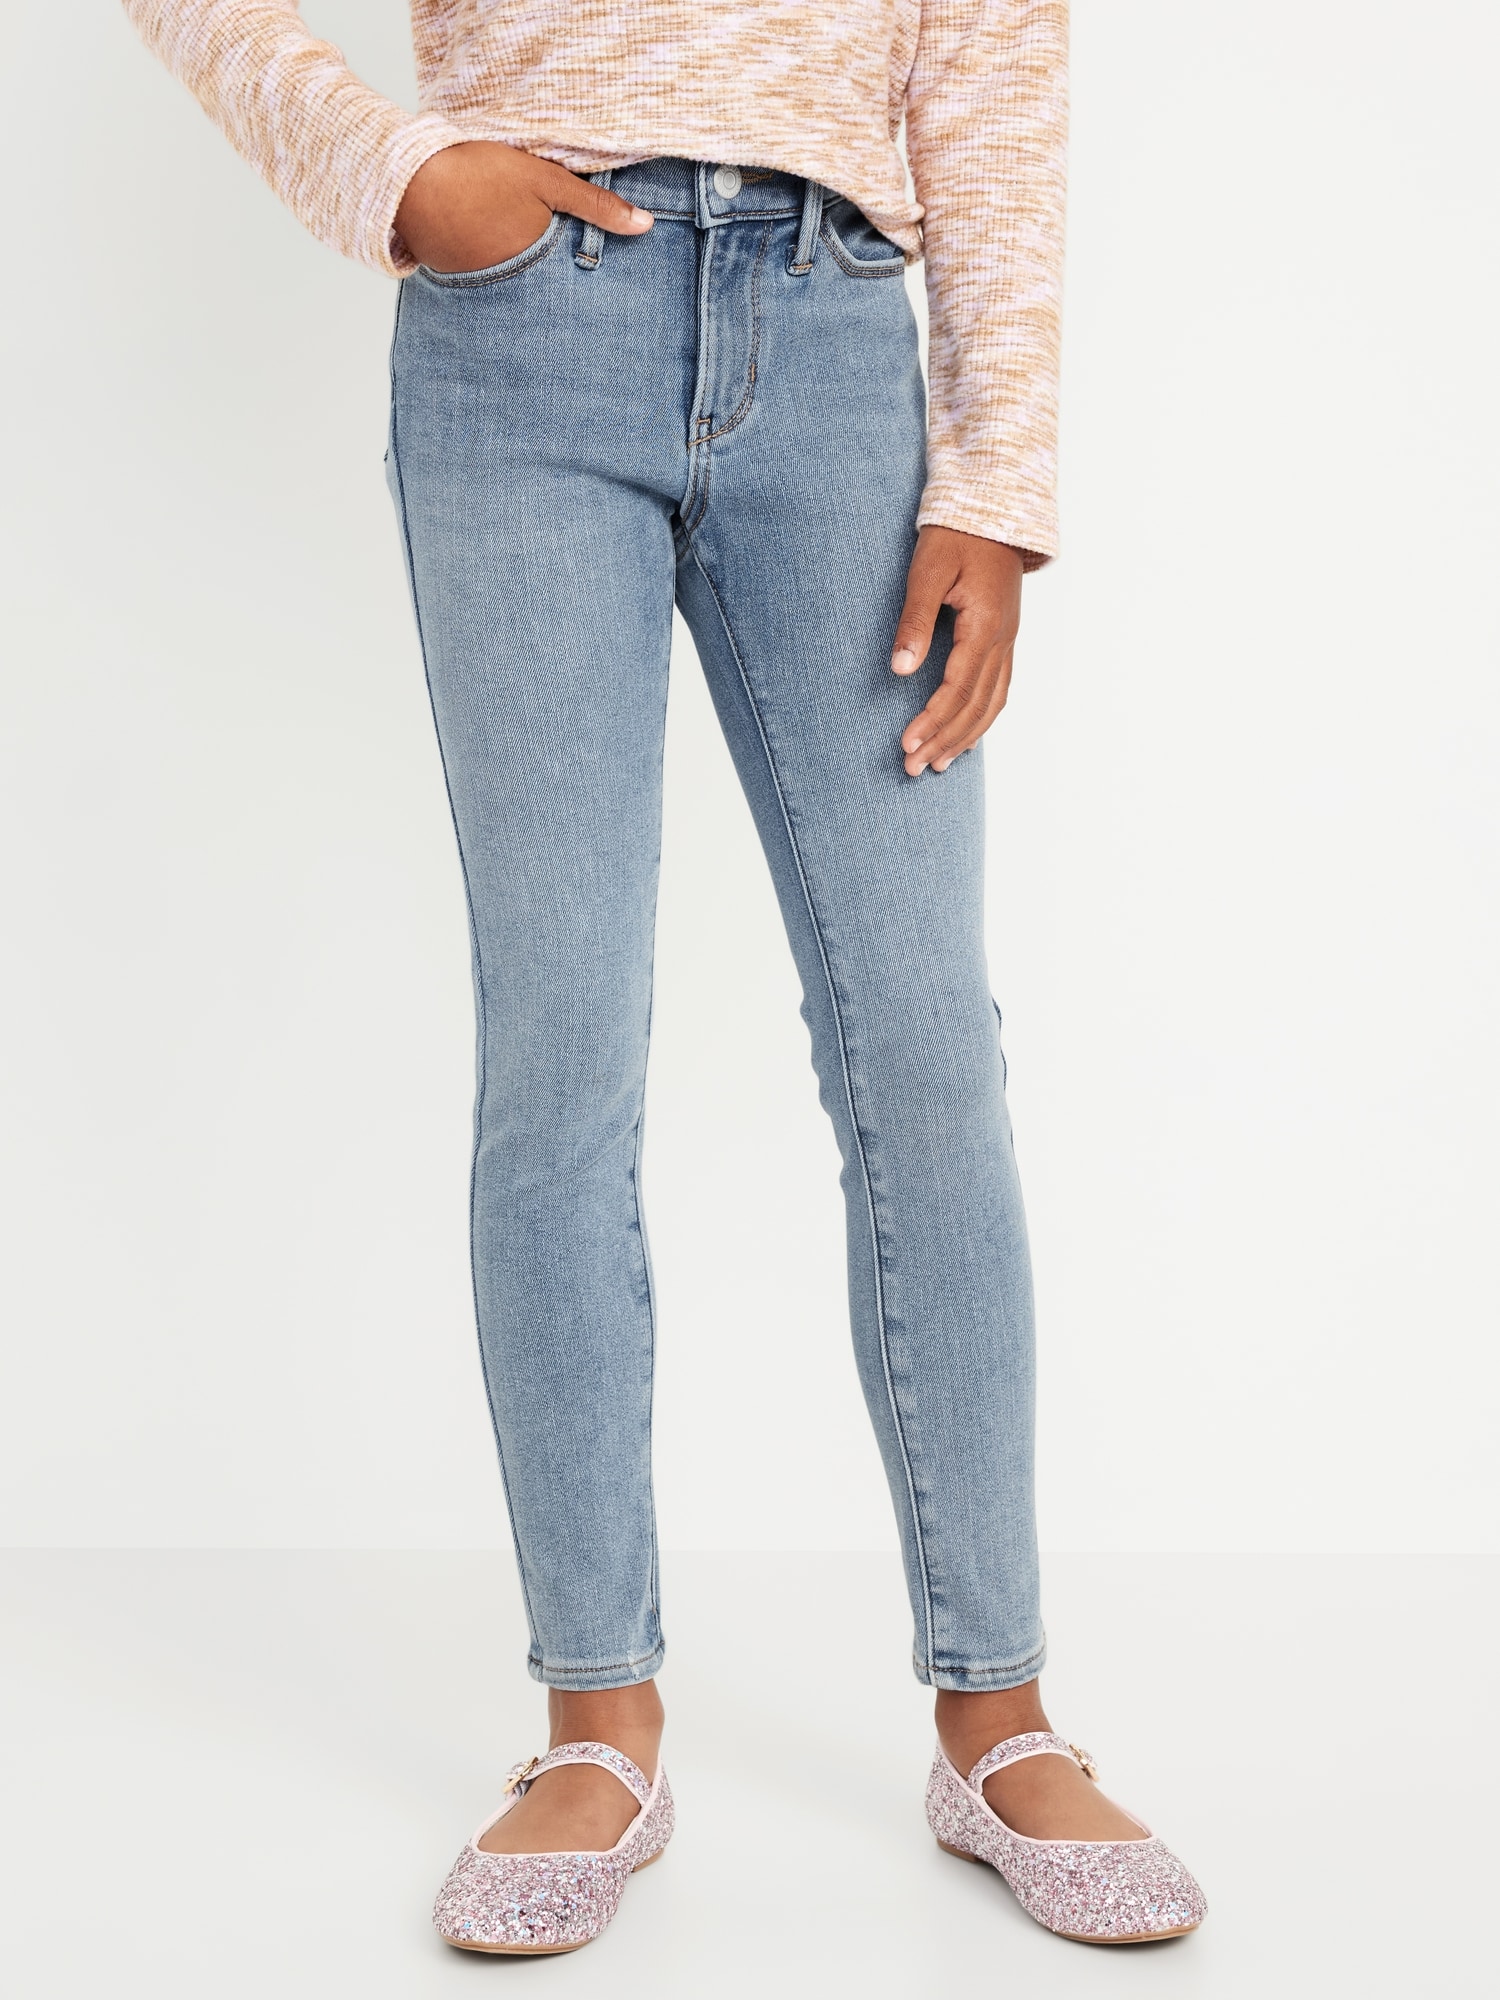 Huge collection of women's jeans & jeggings at great deals